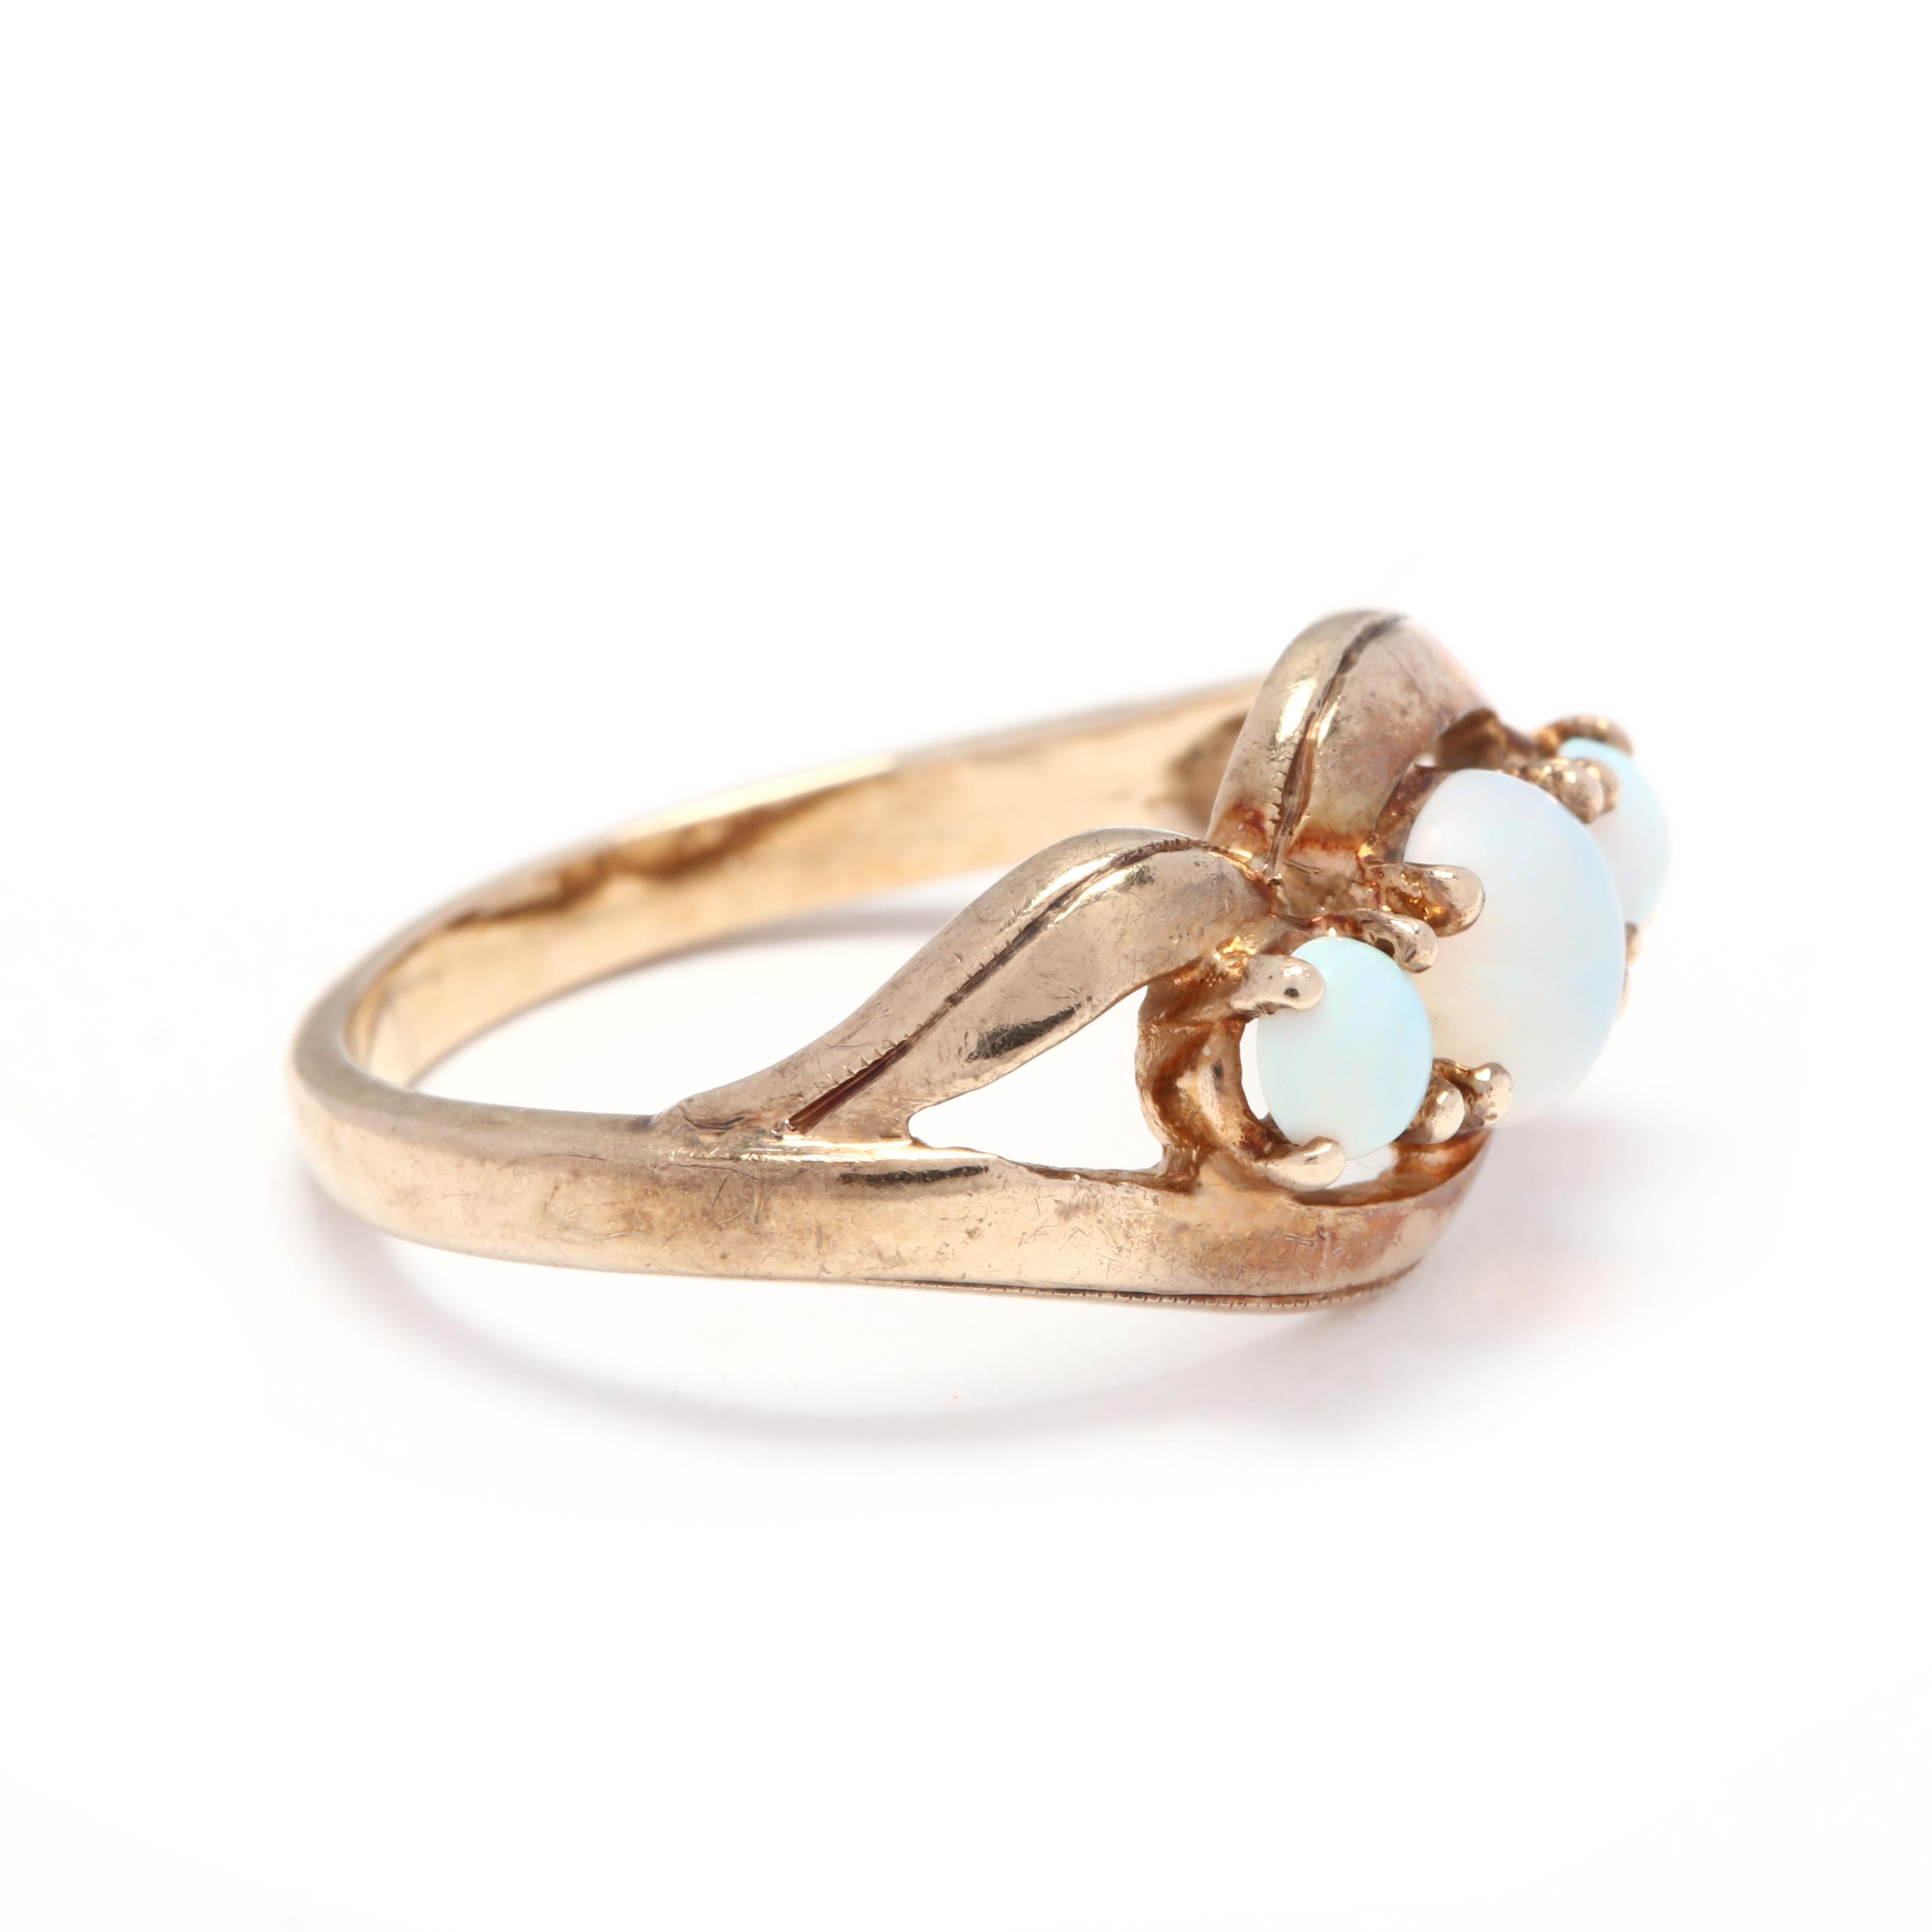 A vintage 10 karat yellow gold and opal three stone statement ring. This ring features three prong set, round cabochon cut opals with a scalloped motif border and split shank.

Stones:
- opal
- round cabochon, 3 stone
- 3.1 - 5.25 mm
- approximately